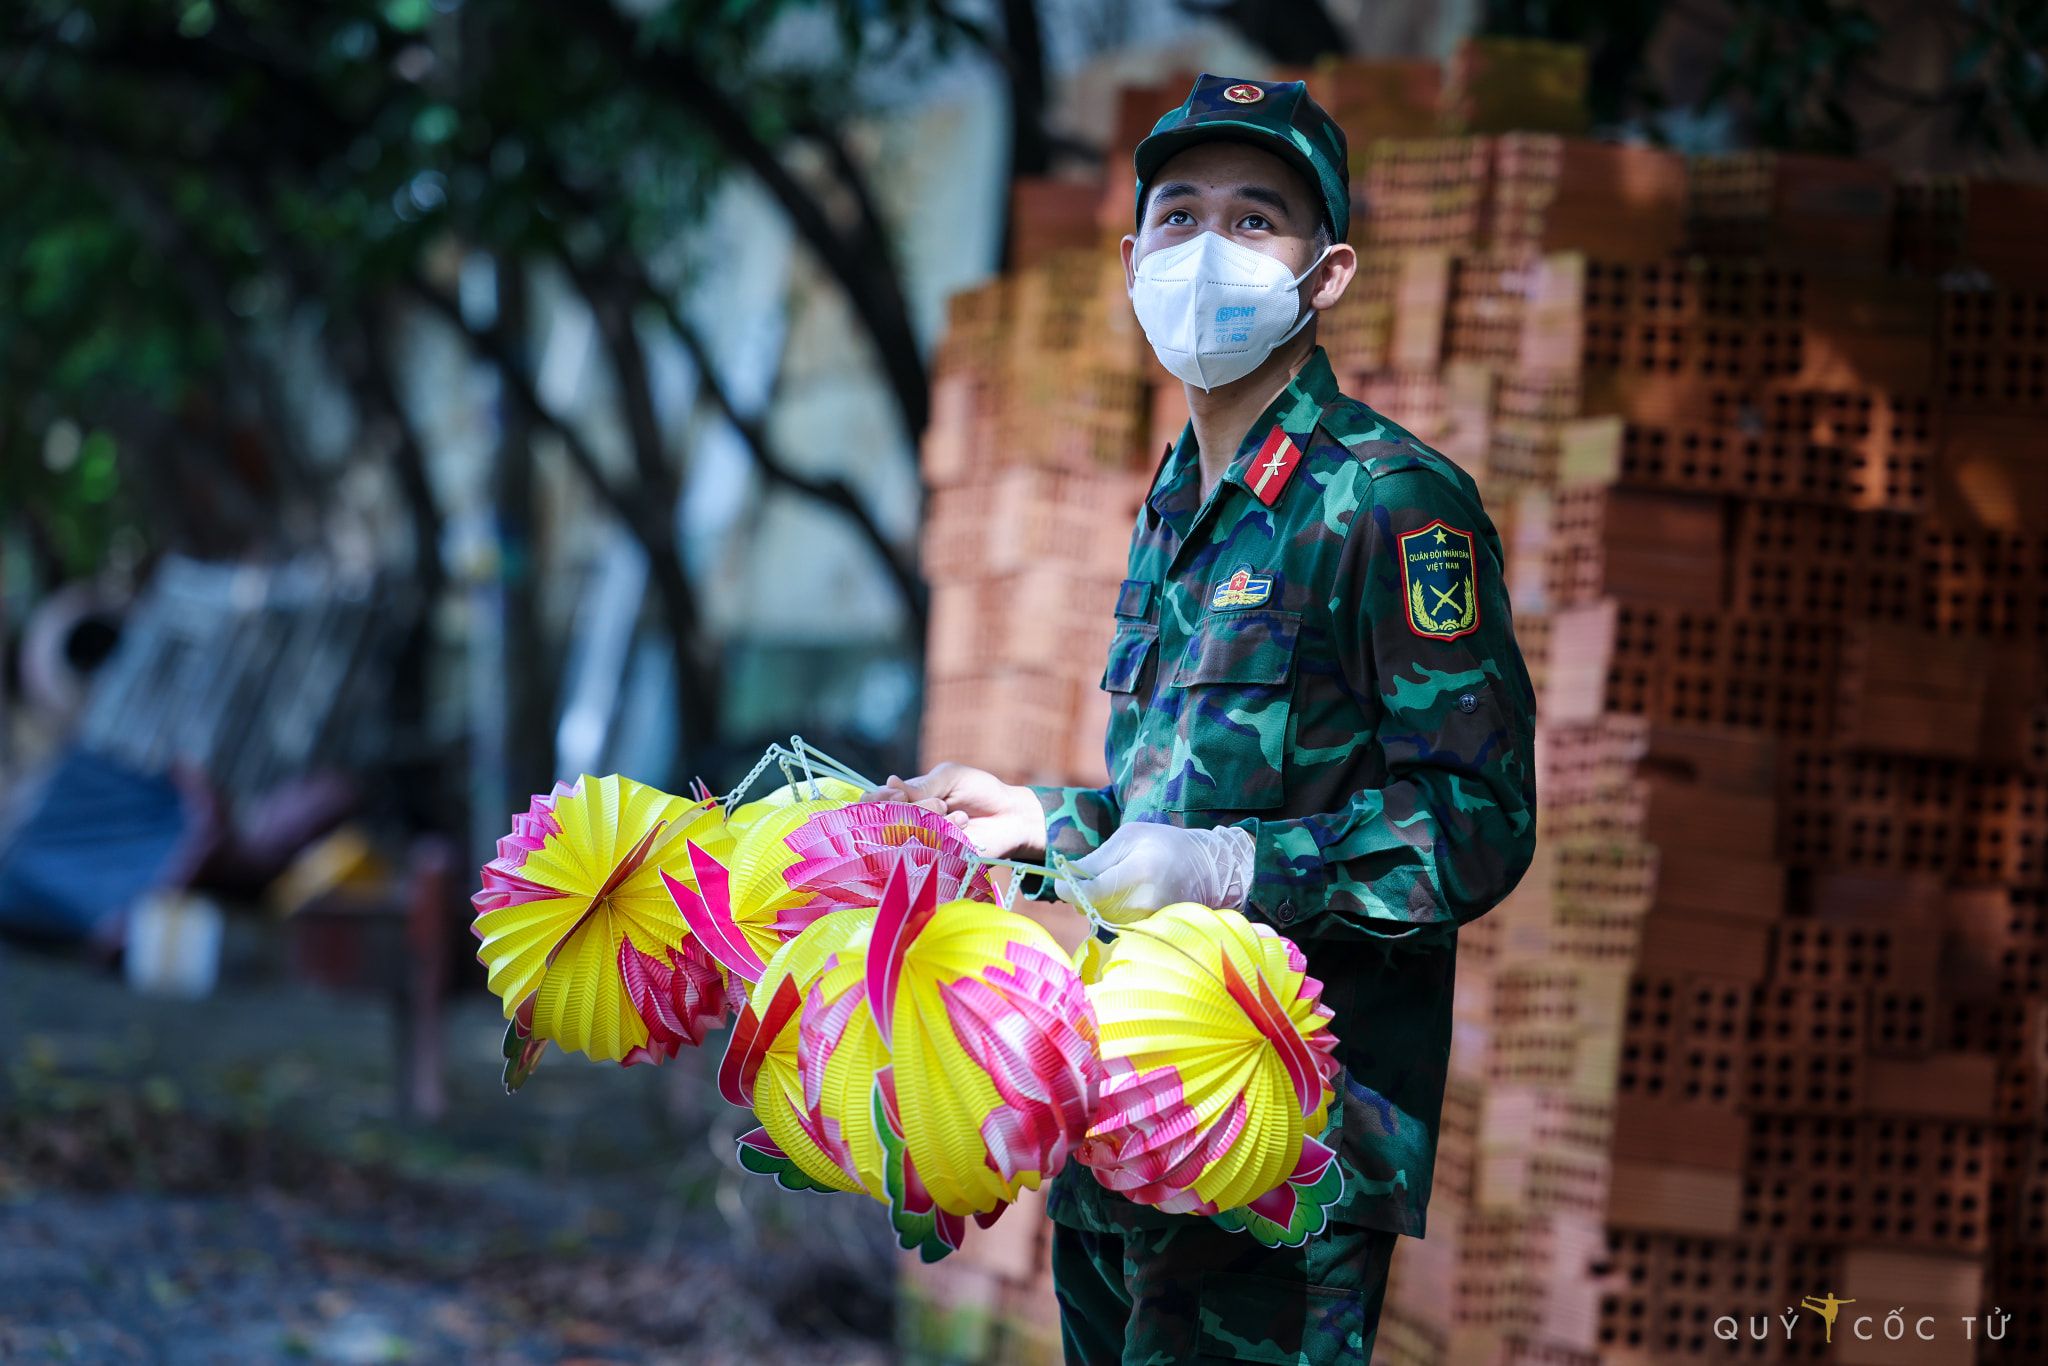 Soldiers, happy Mid-Autumn Festival, don't forget the 5K rule.  Photo: Ngo Tran Hai An (Demon Coc Tu)